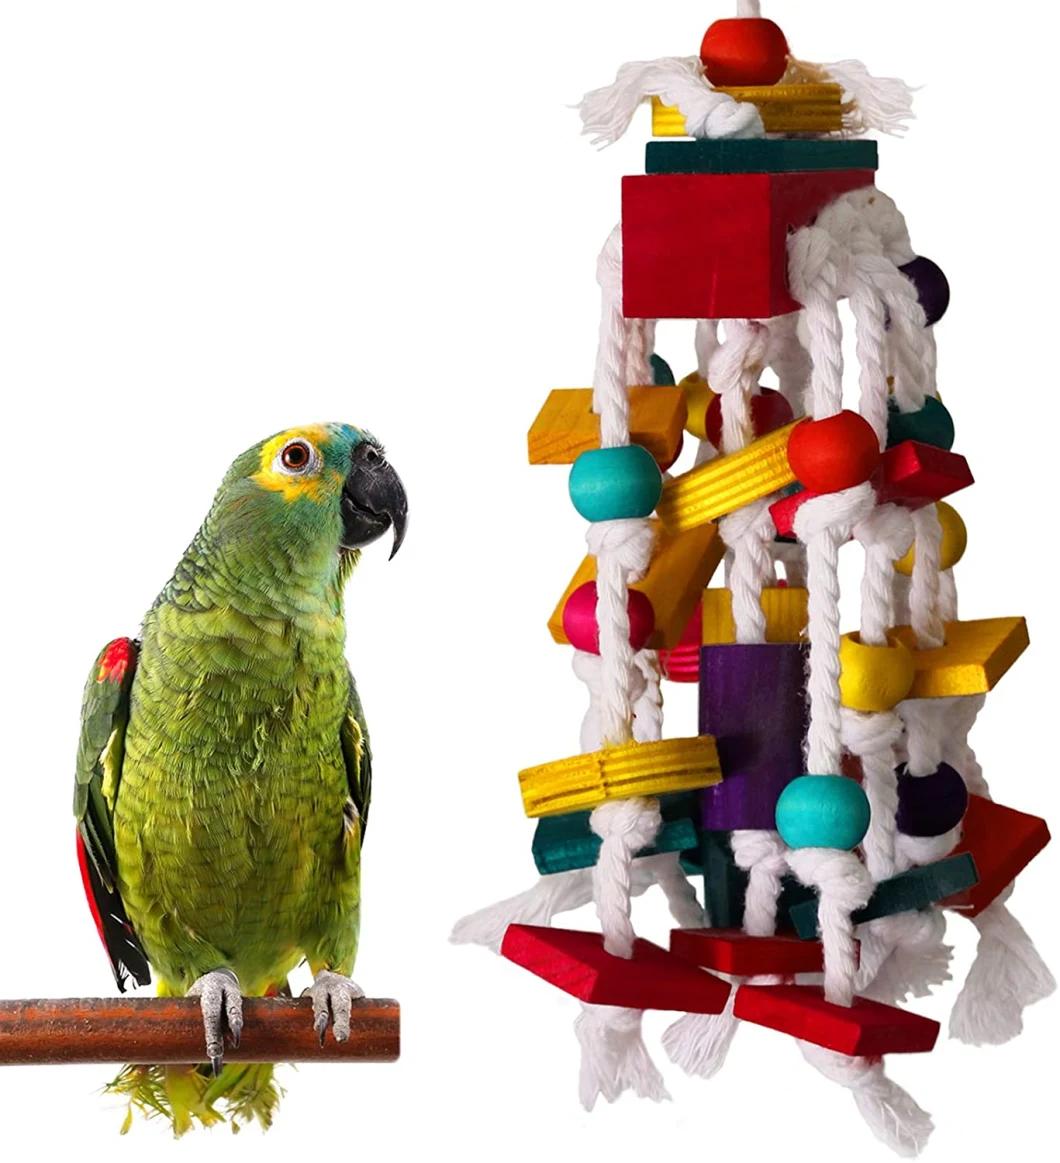 Amazon Bird Cage Bite Non-Toxic Wooden Block Bird Parrot Toys for Small and Medium Parrots and Birds Parrot Toy